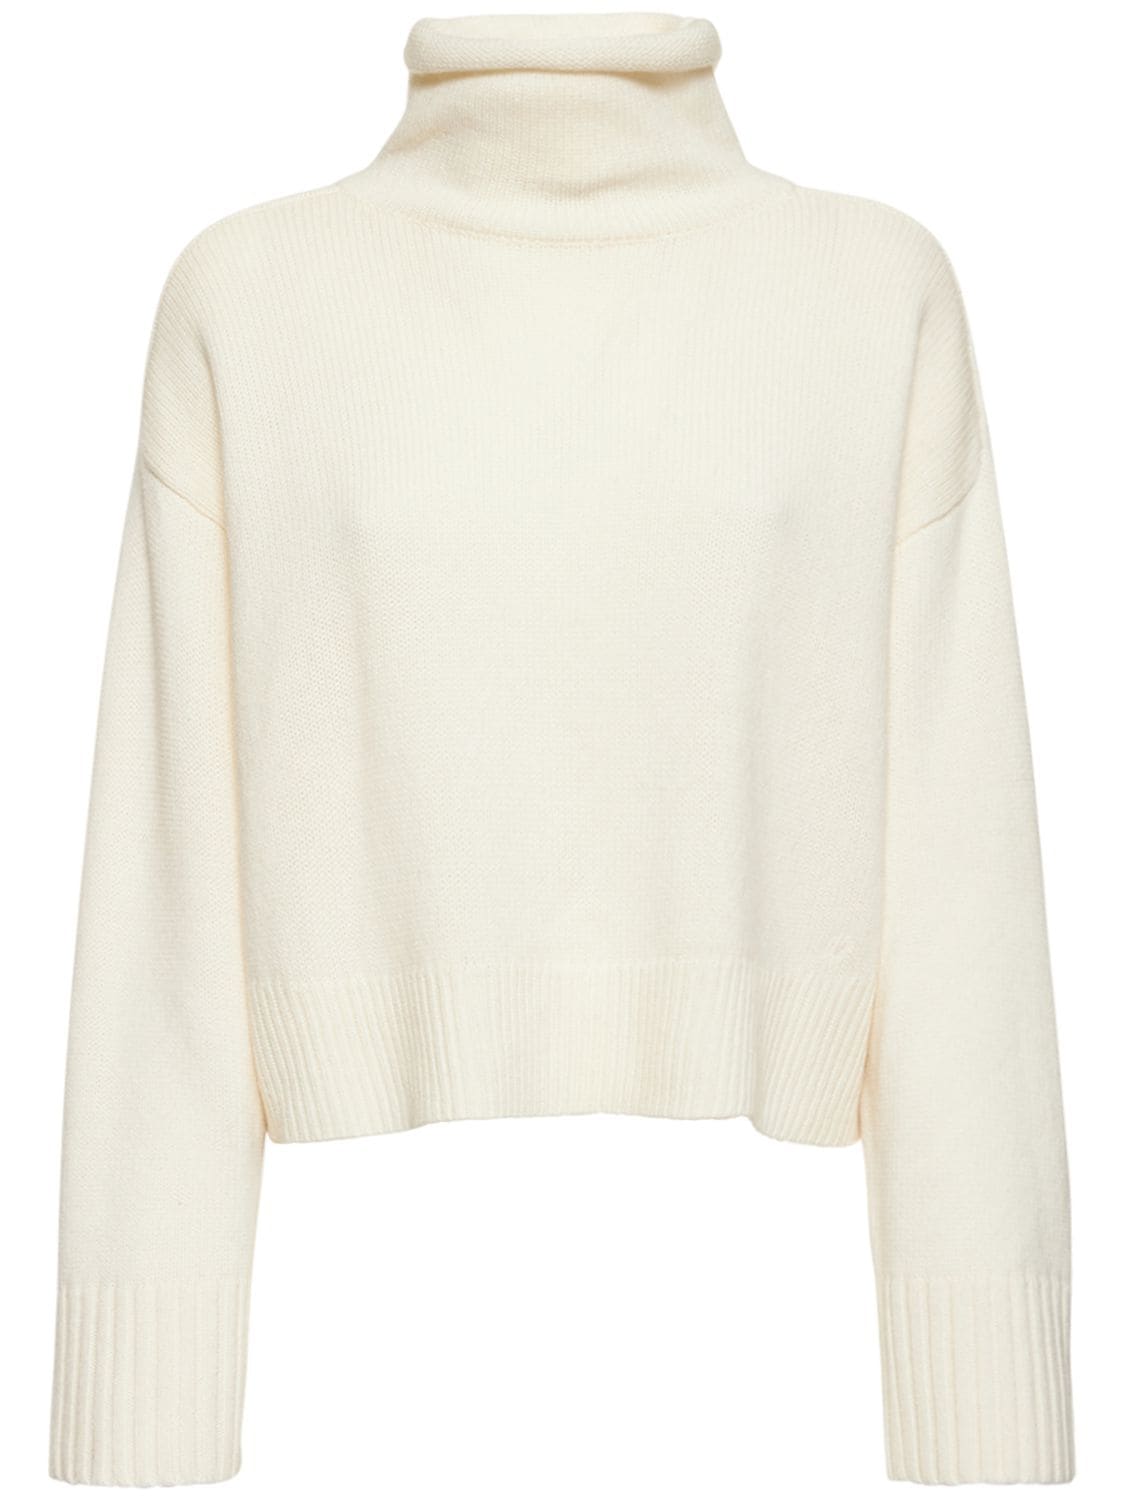 Loulou Studio Stintino Wool & Cashmere Sweater In Ivory